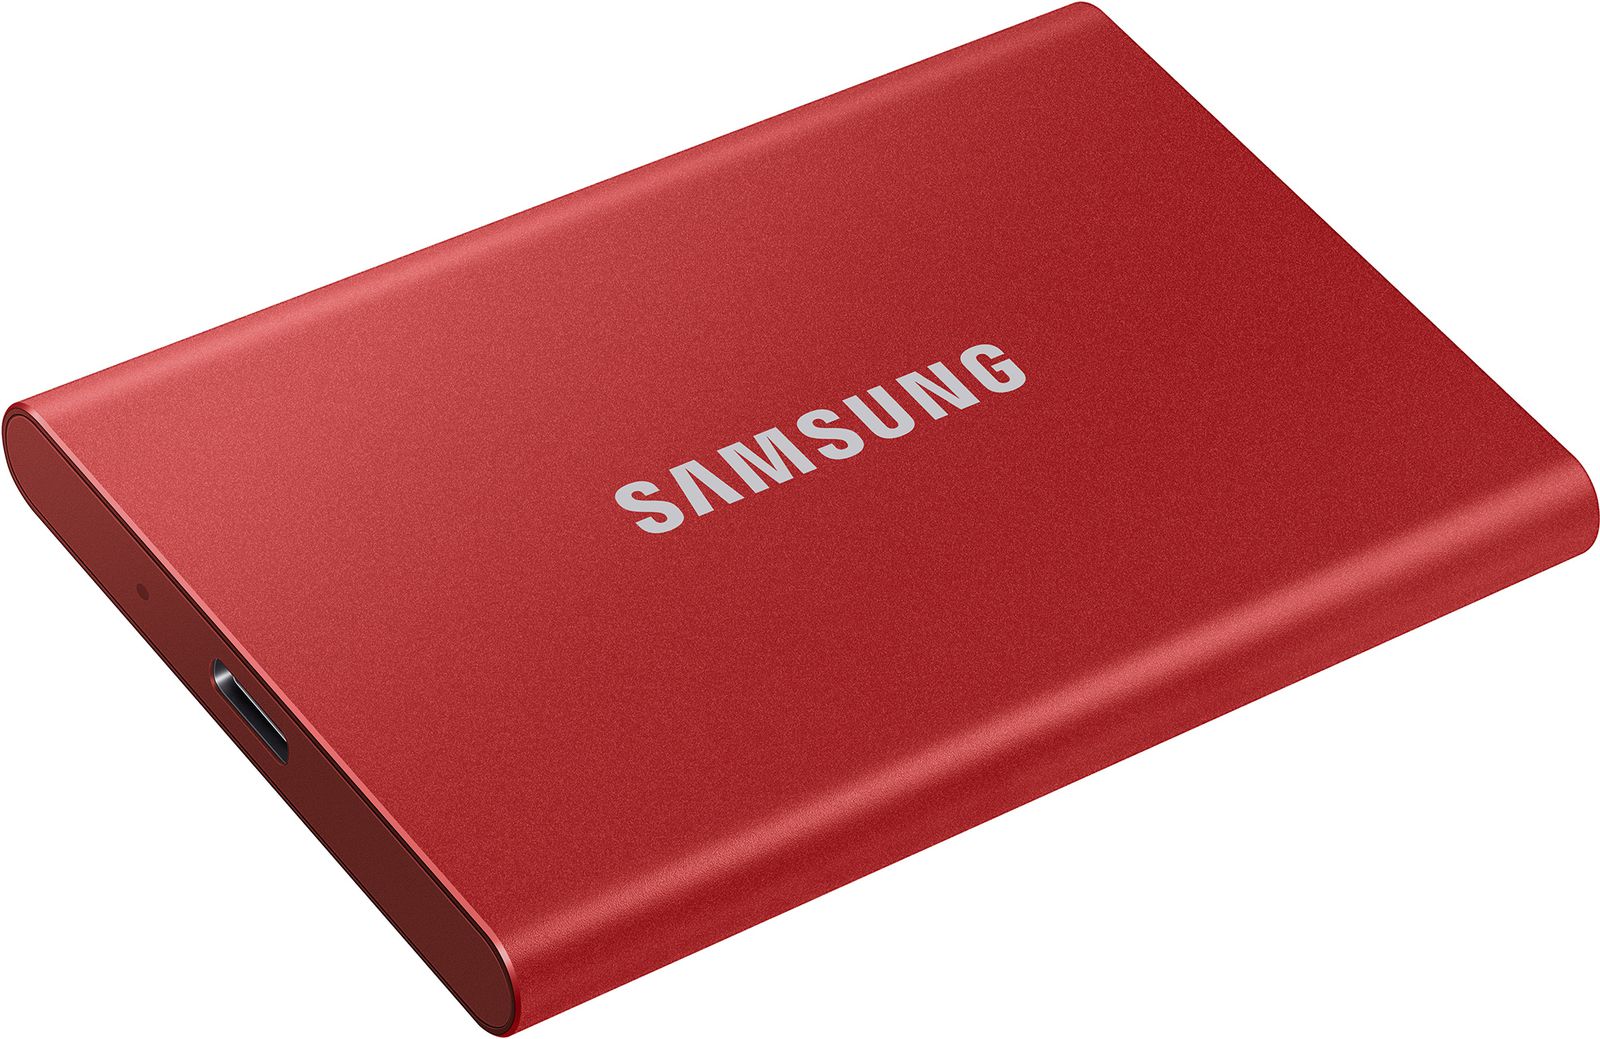 Samsung T7 and Samsung T5 SSD Stand(s) - UPDATED by Geddy